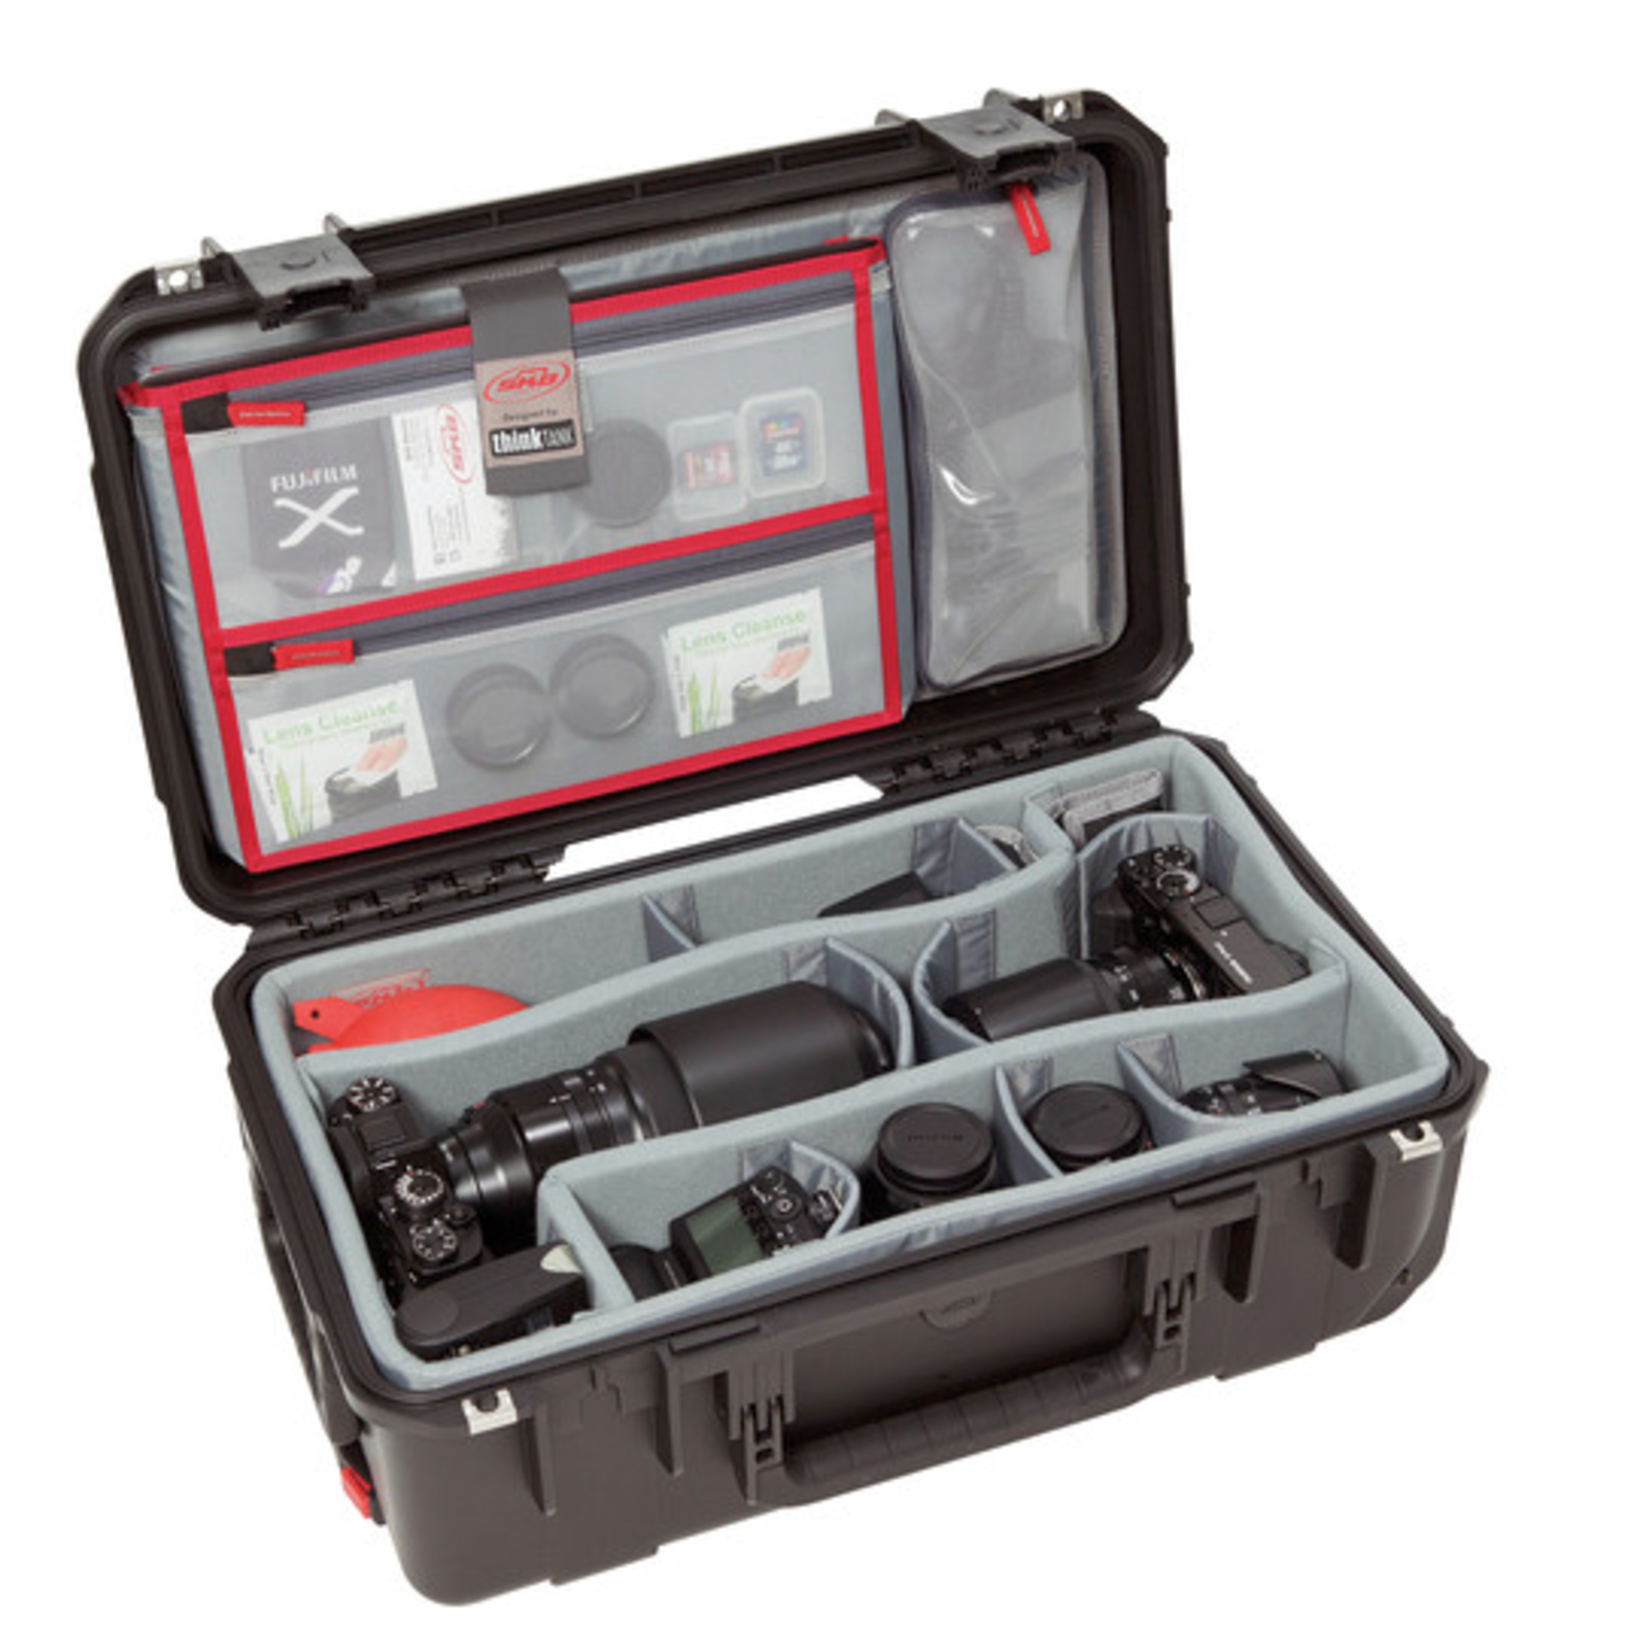 SKB Cases SKB iSeries 2011-7 Case with Think Tank Photo Dividers & Lid Organizer (Black)